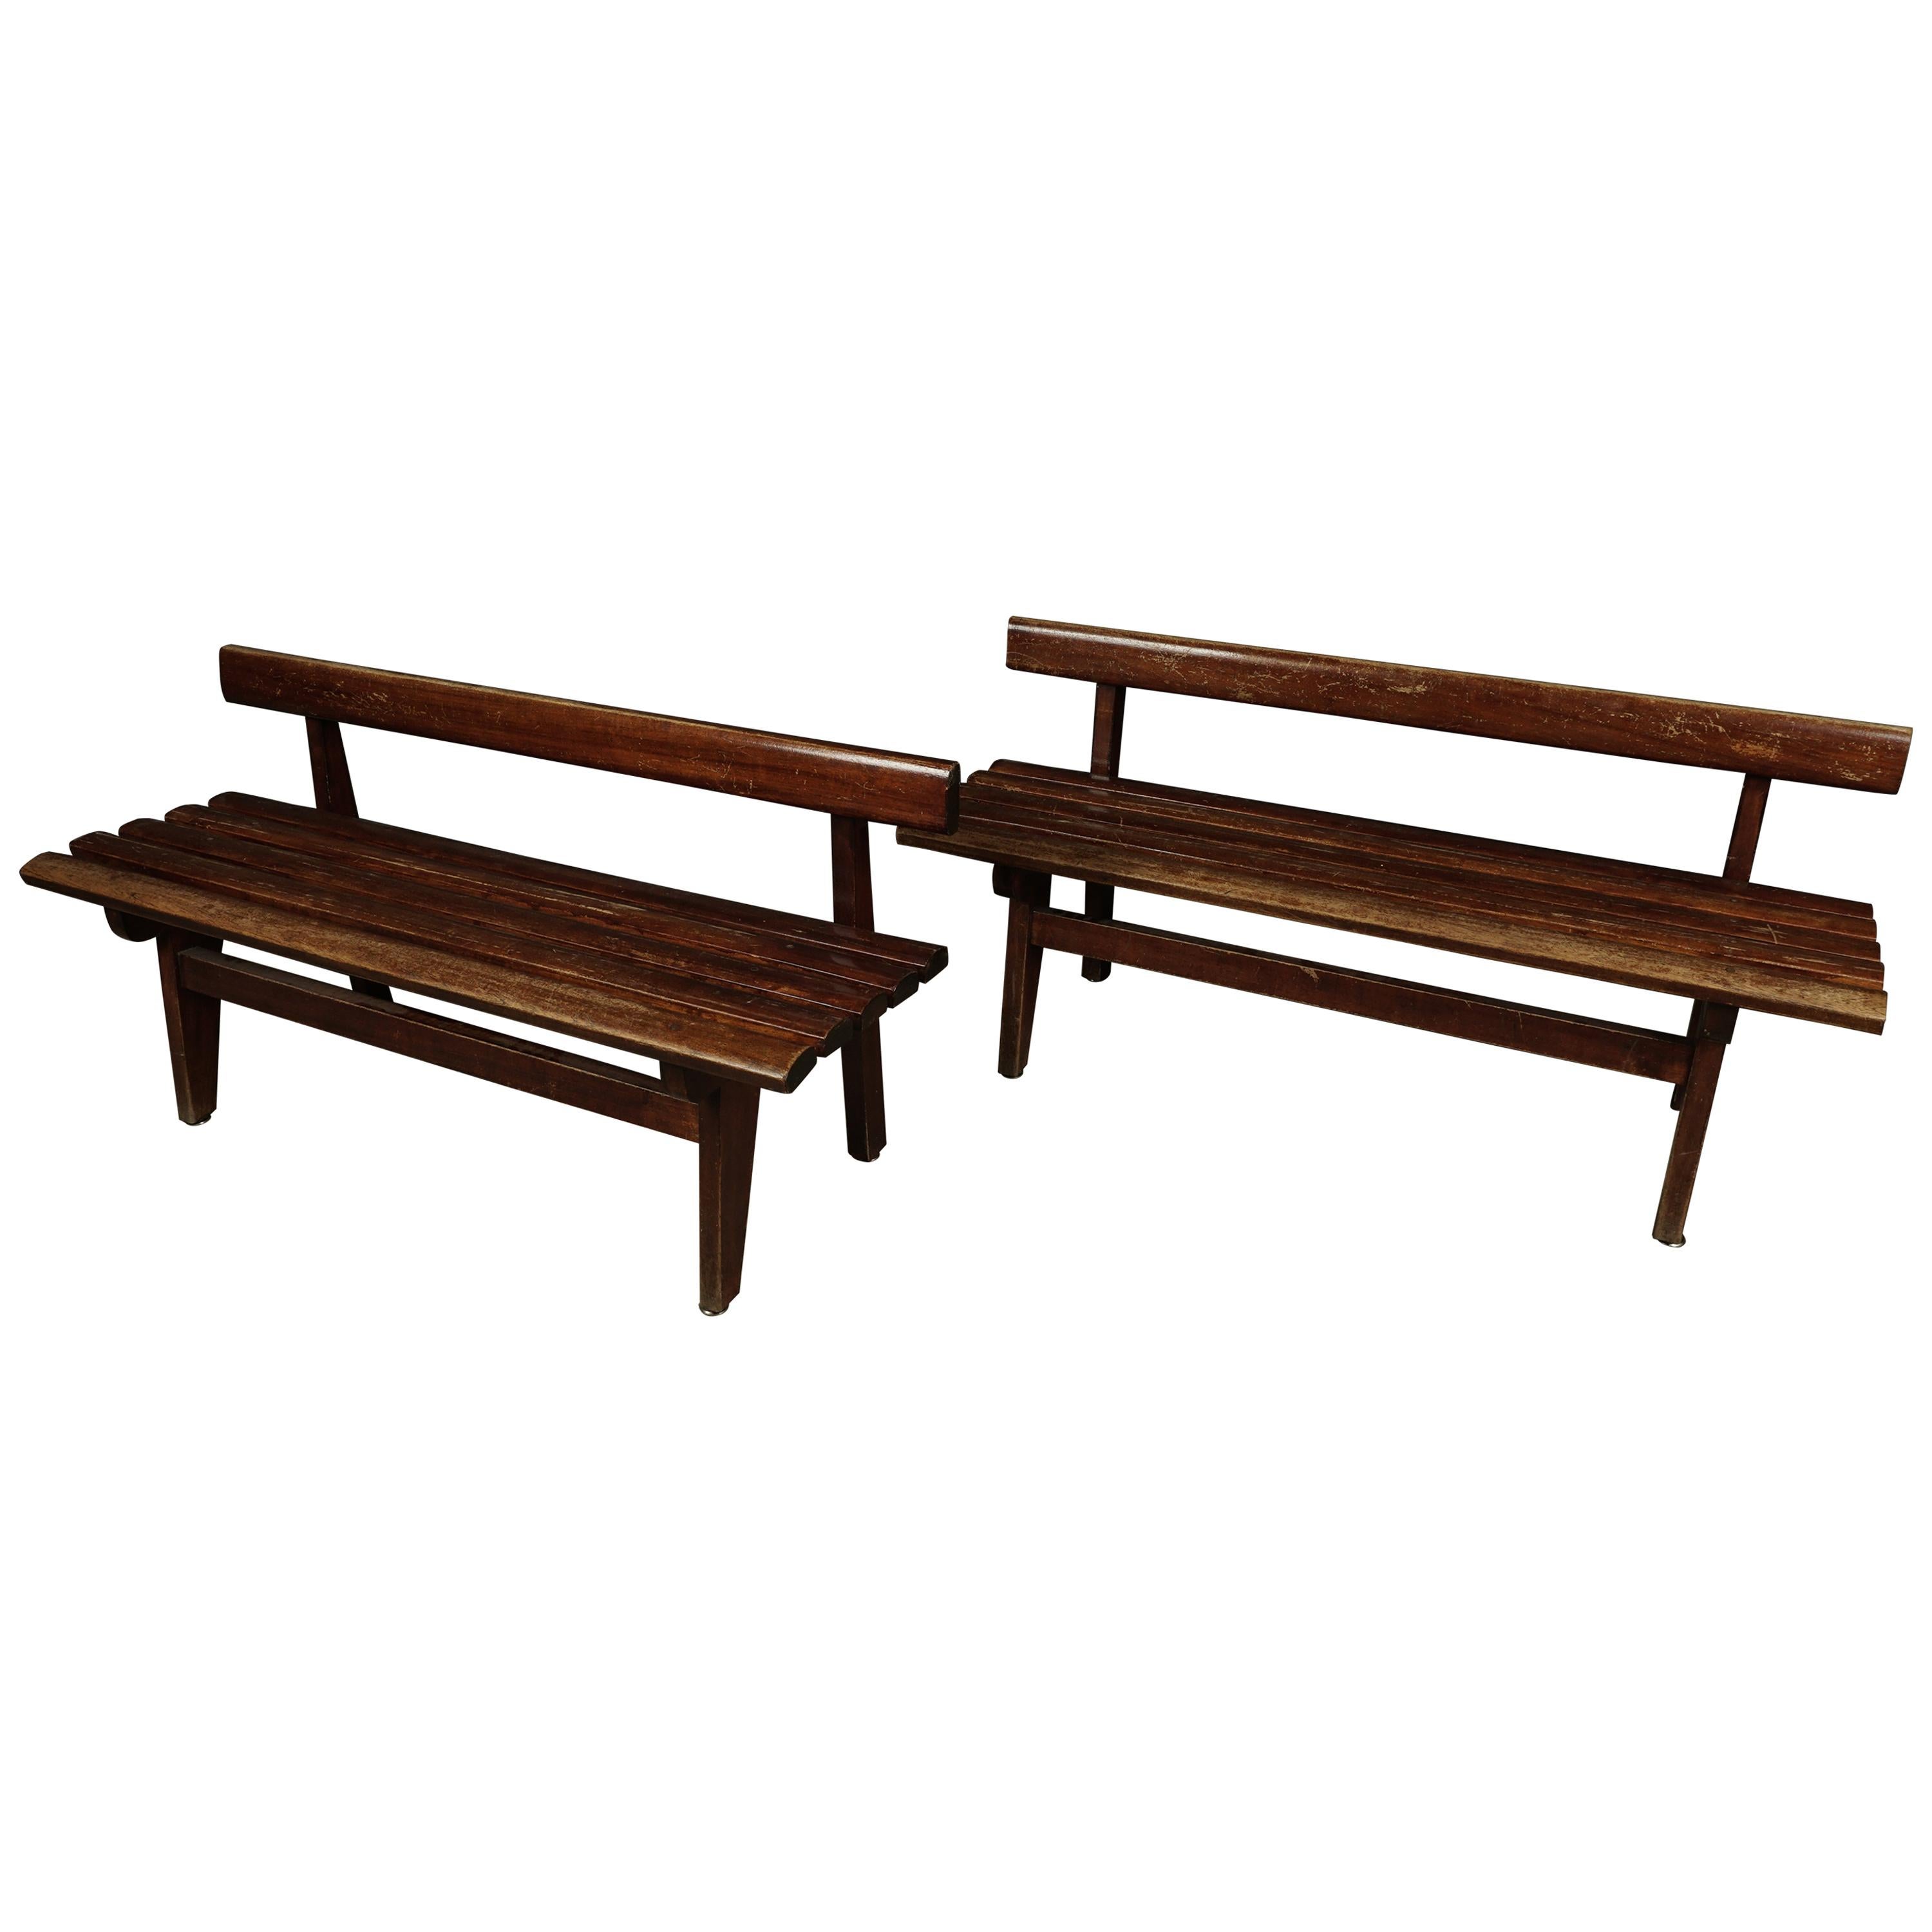 Rare Pair of Vintage Benches from France, 1950s